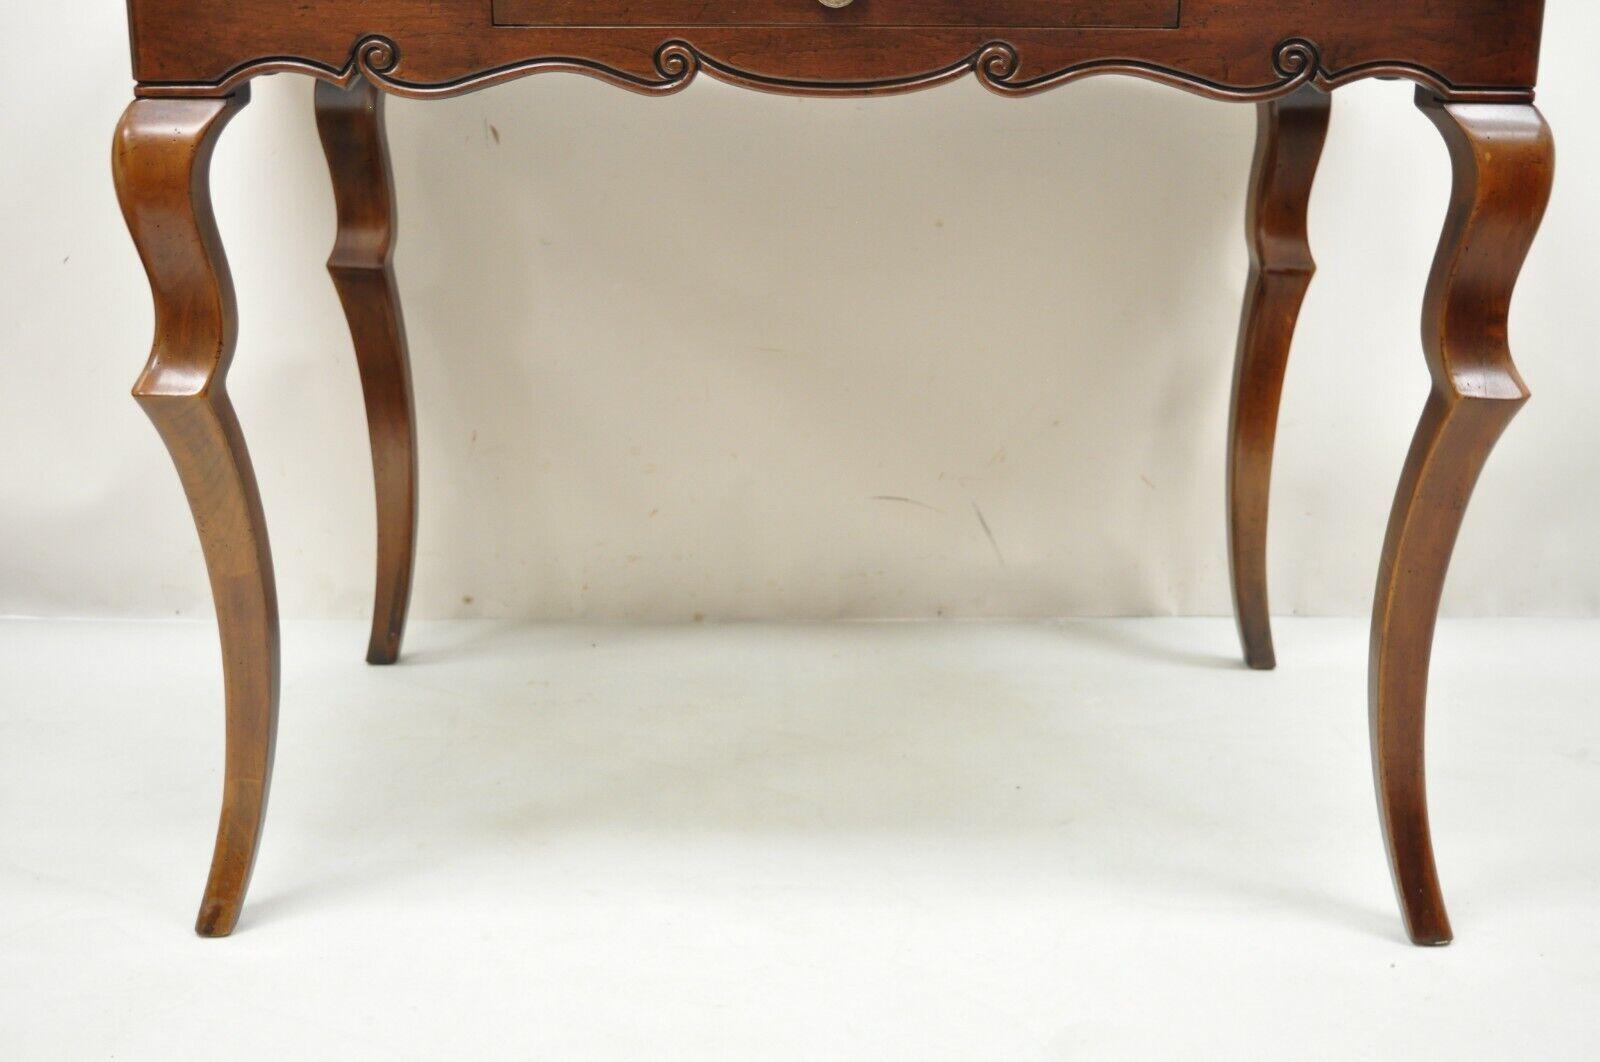 Baker French Provincial Cherry Marquetry Inlay Console Table Desk In Good Condition For Sale In Philadelphia, PA